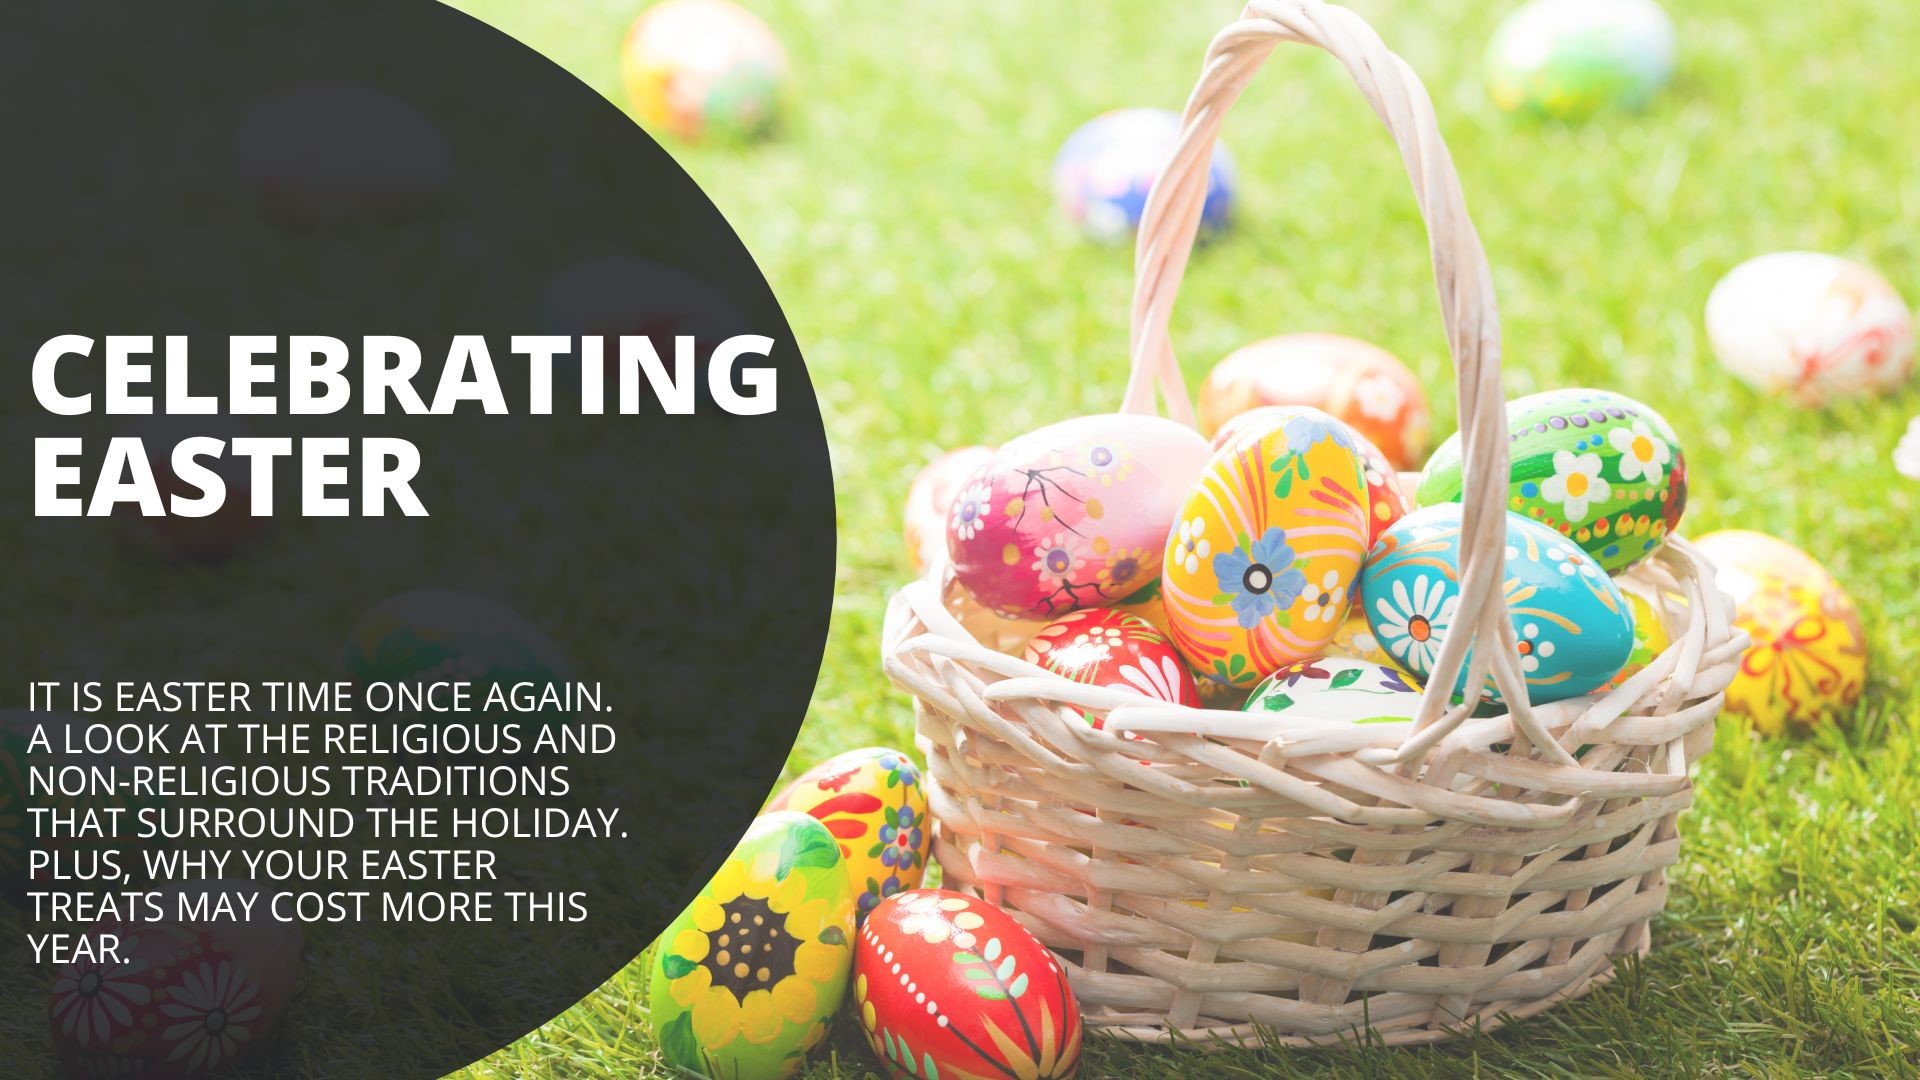 It is Easter time once again. A look at the religious and non-religious traditions that surround the holiday. Plus, why your Easter treats may cost more this year.